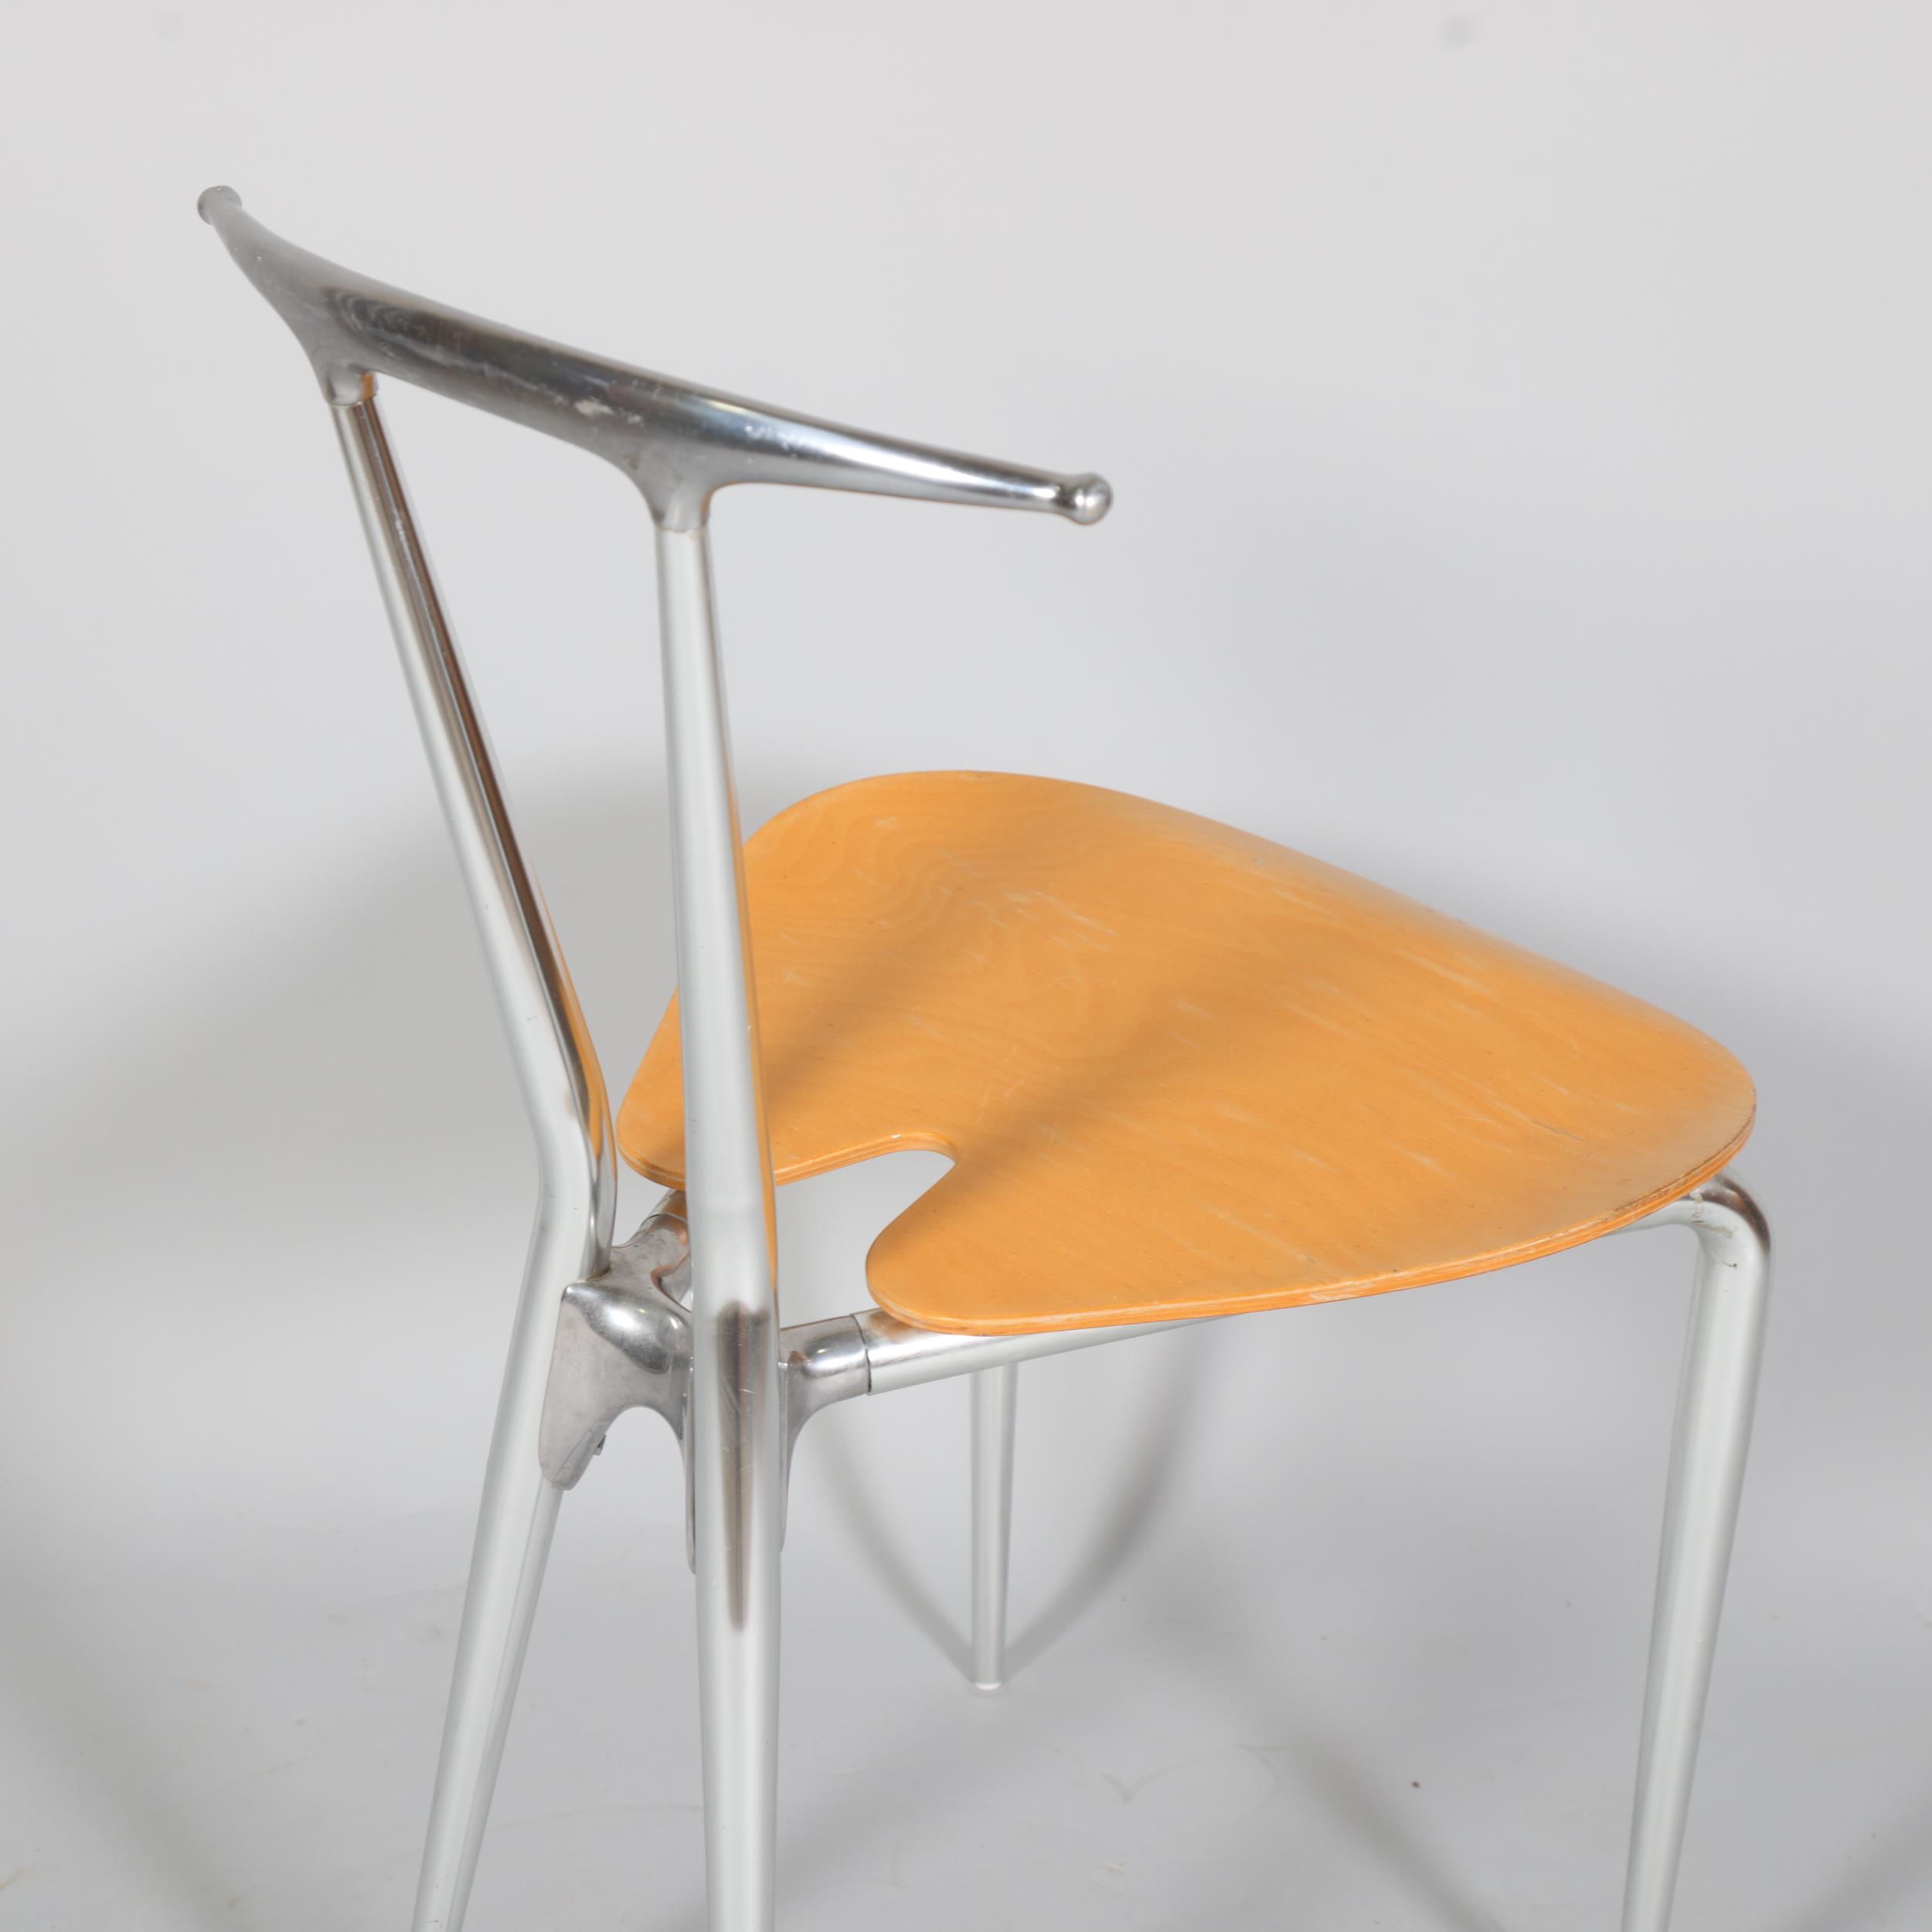 Carlo Bartoli, a Hole chair designed in 1993, the polished aluminium frame with ply seat as seen - Image 2 of 3